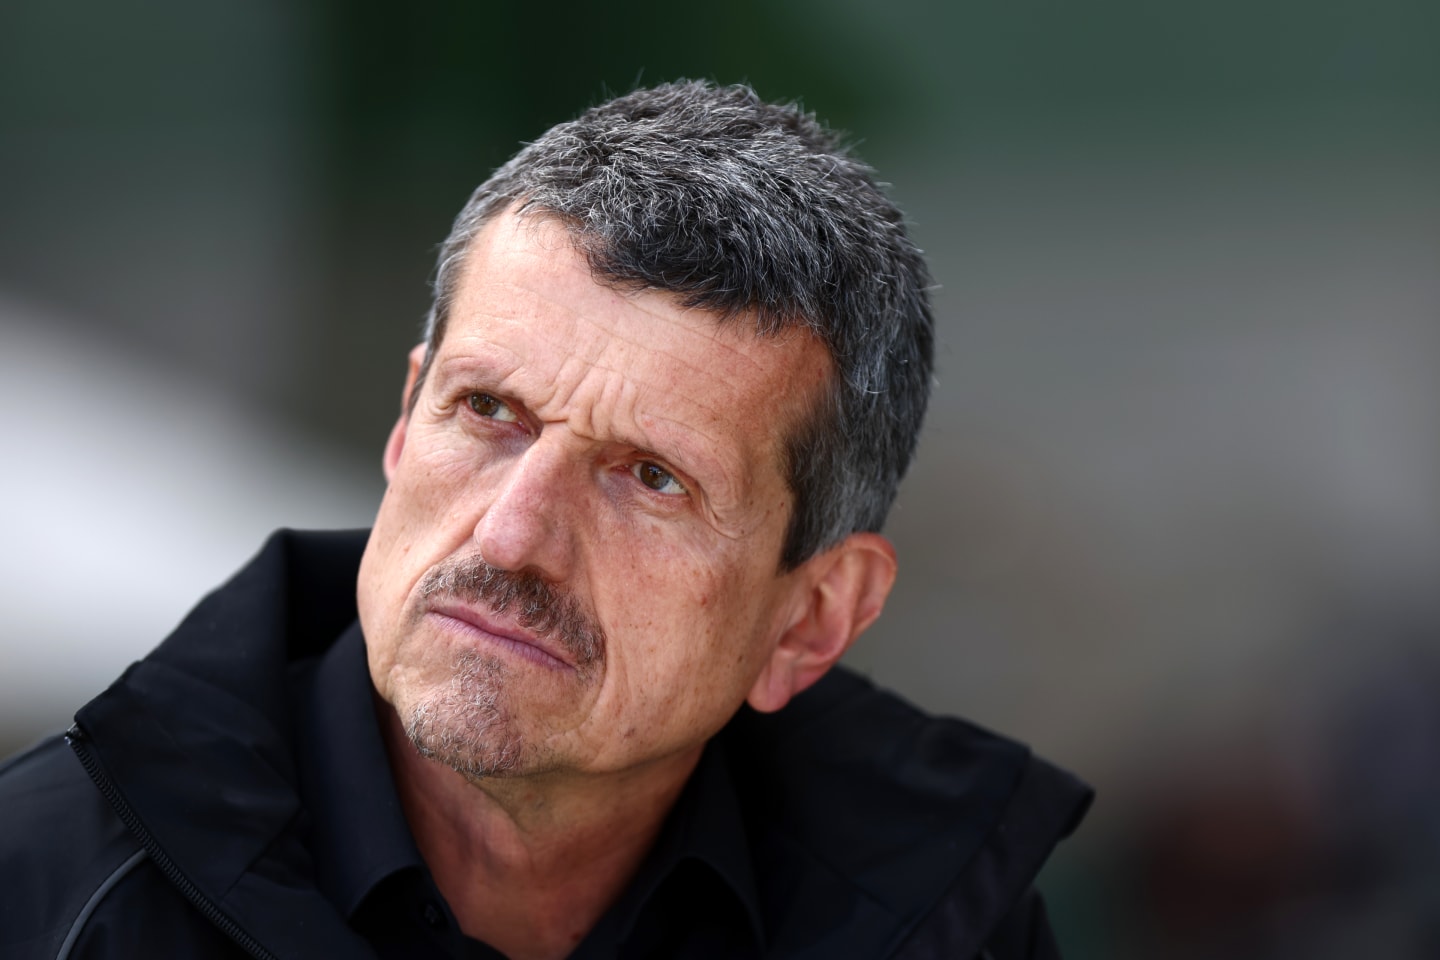 MELBOURNE, AUSTRALIA - MARCH 30: Haas F1 Team Principal Guenther Steiner looks on in the Paddock